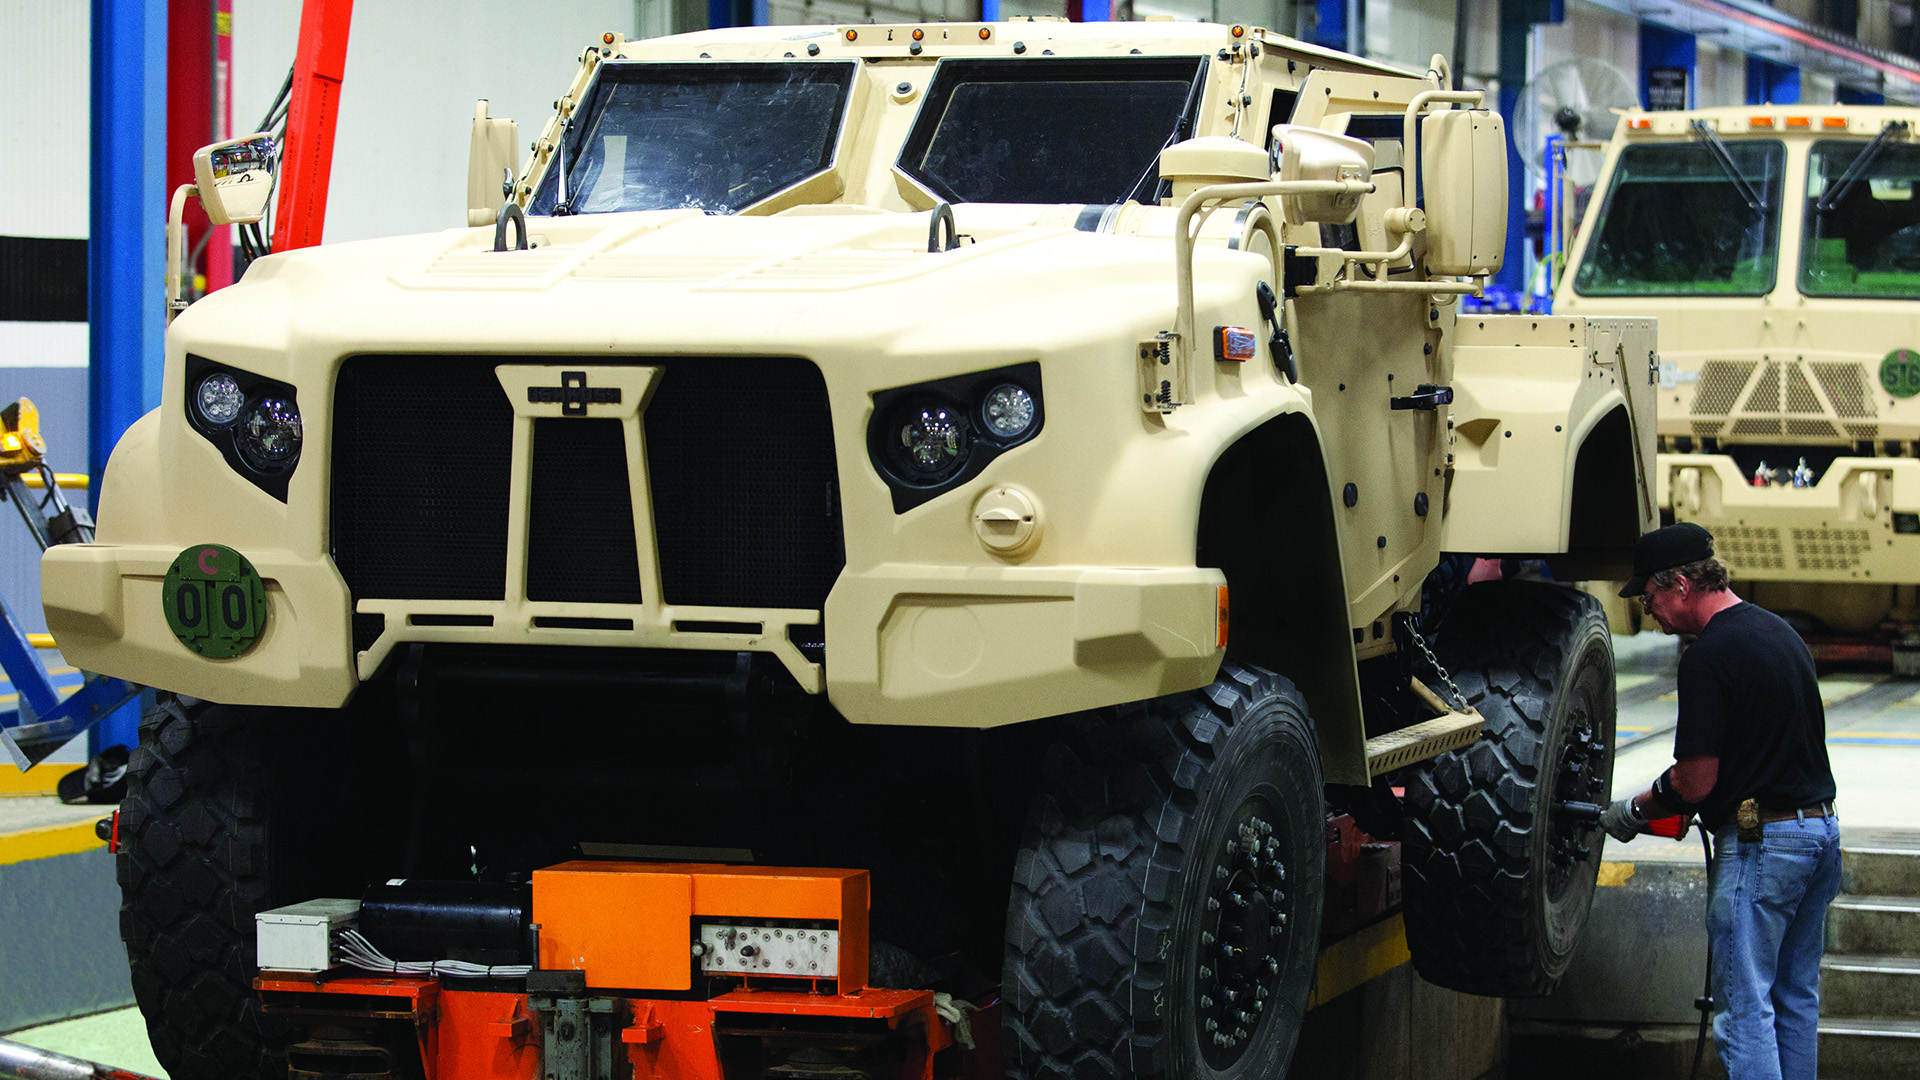 An auto manufacturing plant employee works on the wheel of a Joint Light Tactical Vehicle on a factory assembly line.